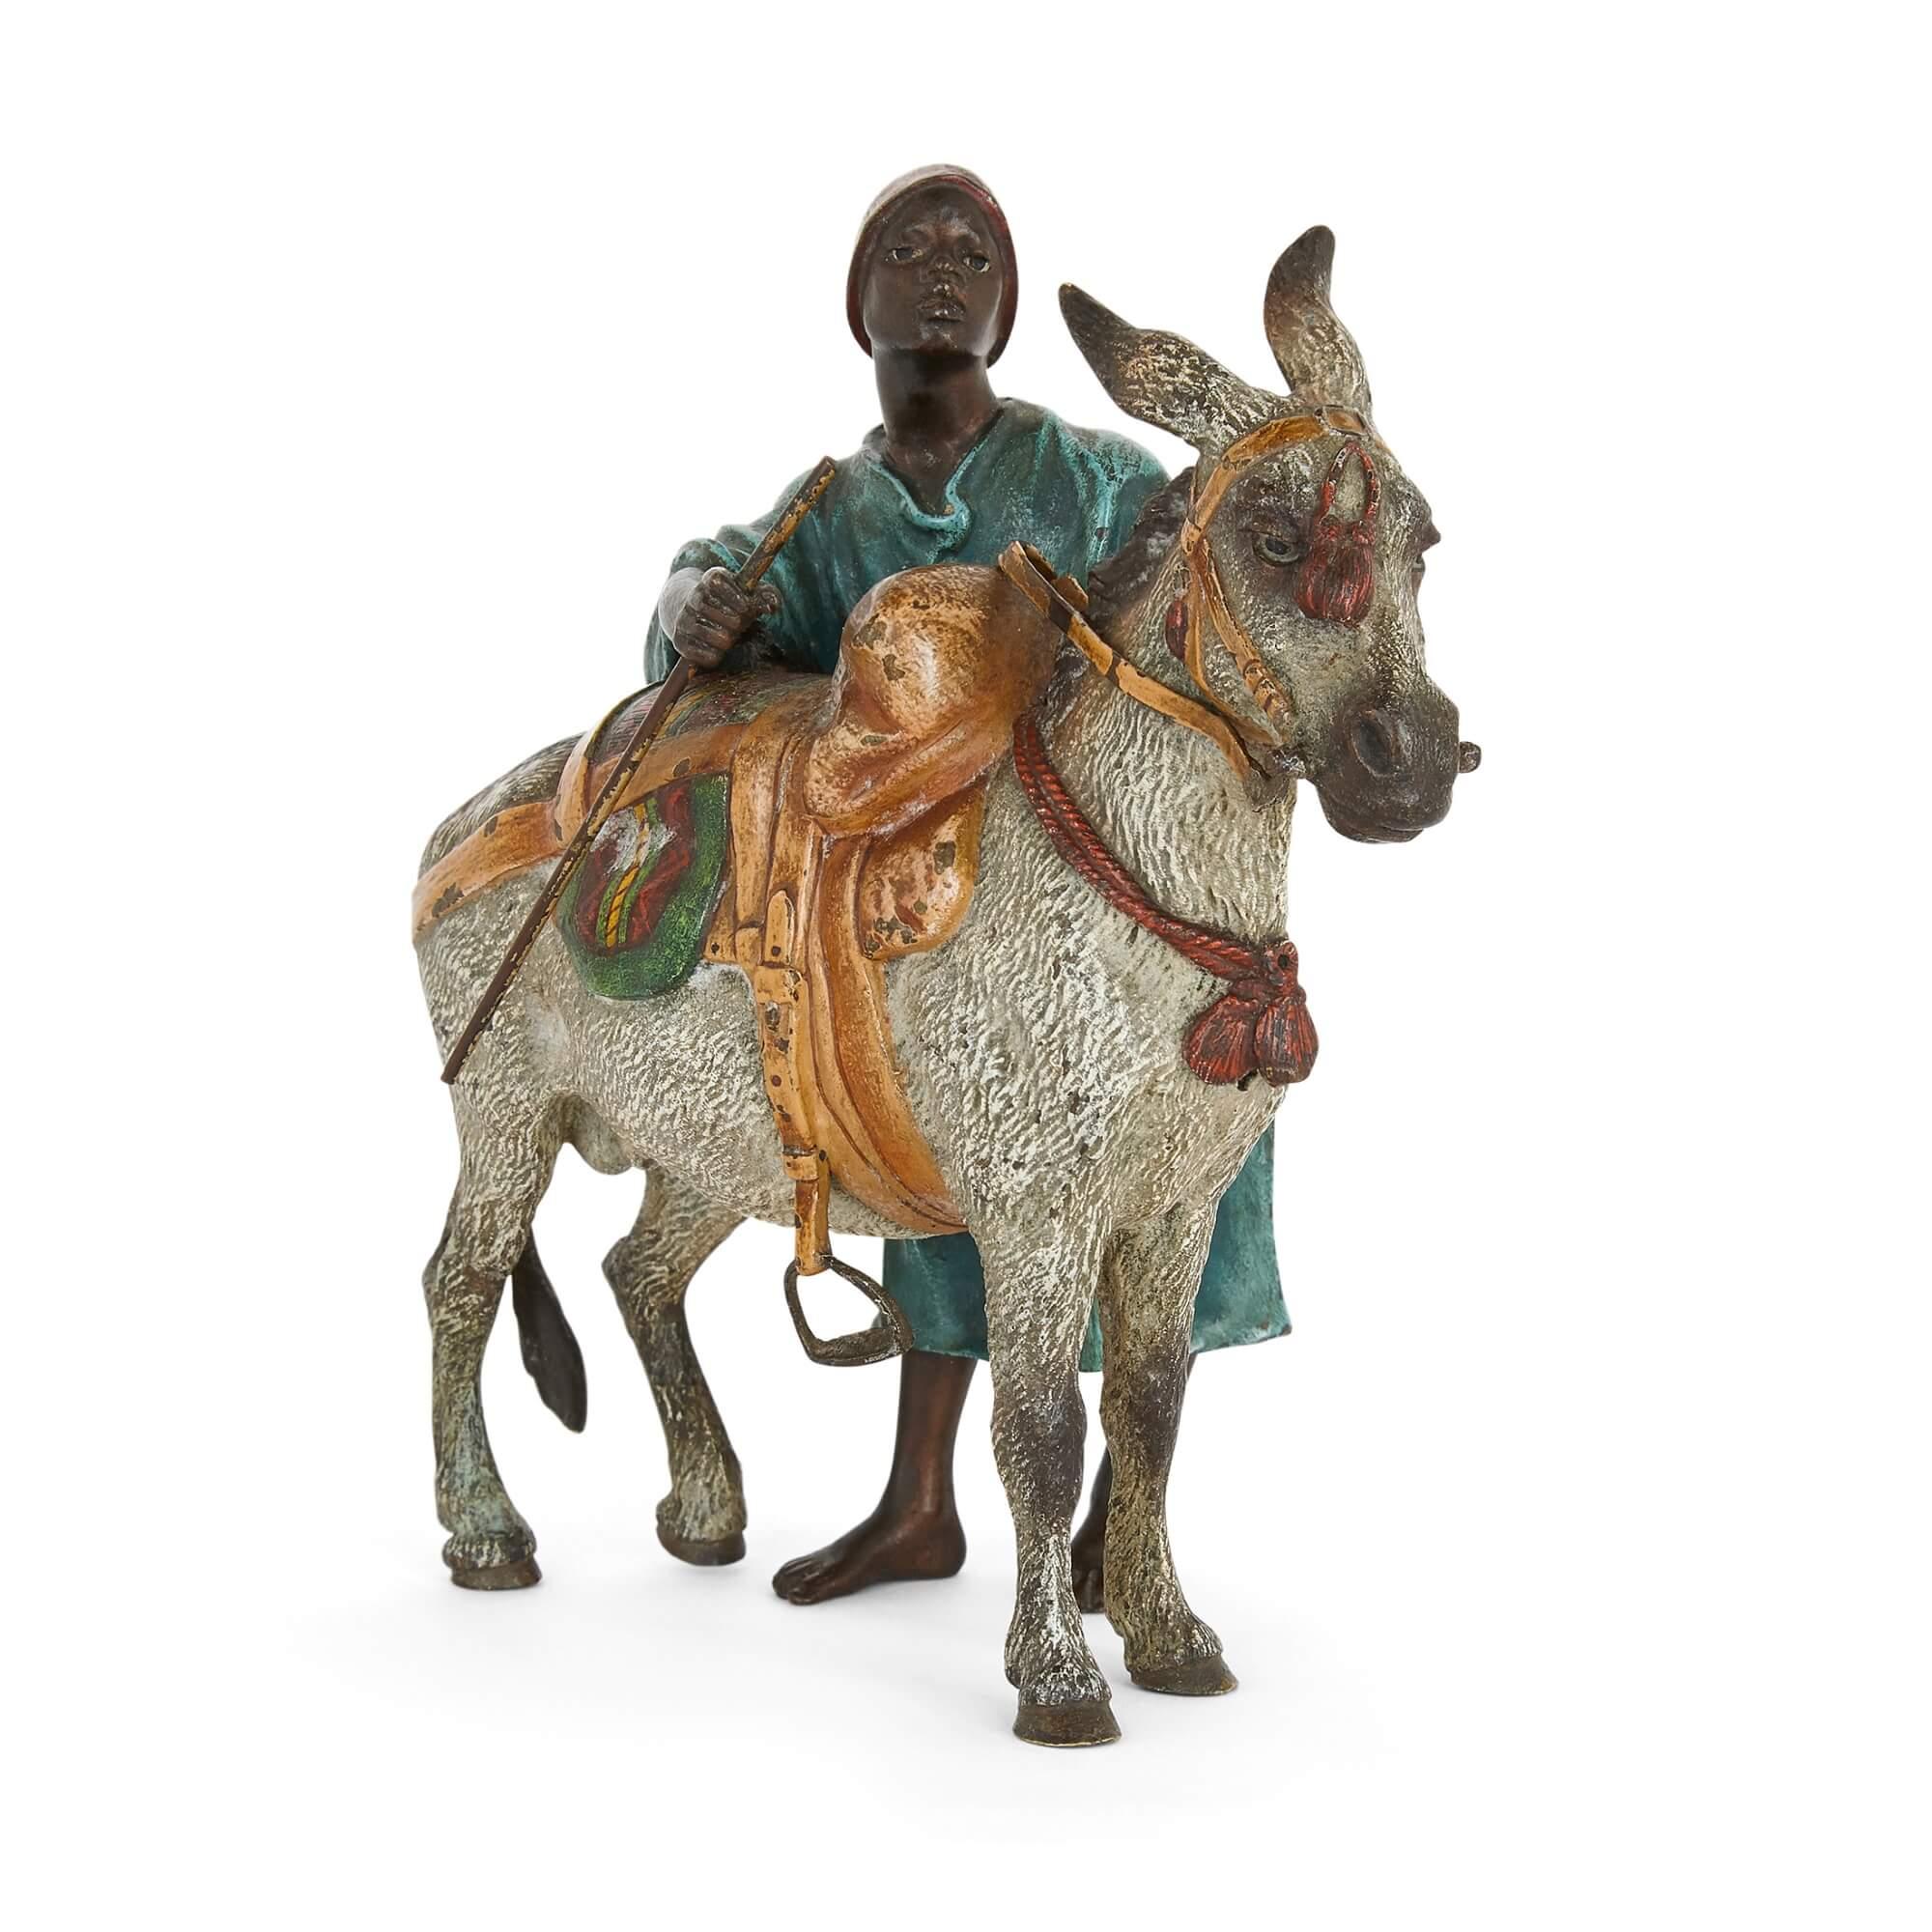 Antique Austrian orientalist bronze donkey by Bergman
Austrian, c. 1910
Measures: Height 13cm, width 13cm, depth 7cm

This beautiful cold-painted bronze by Franz Xaver Bergman depicts a donkey and its rider, who stands beside. The bronze group